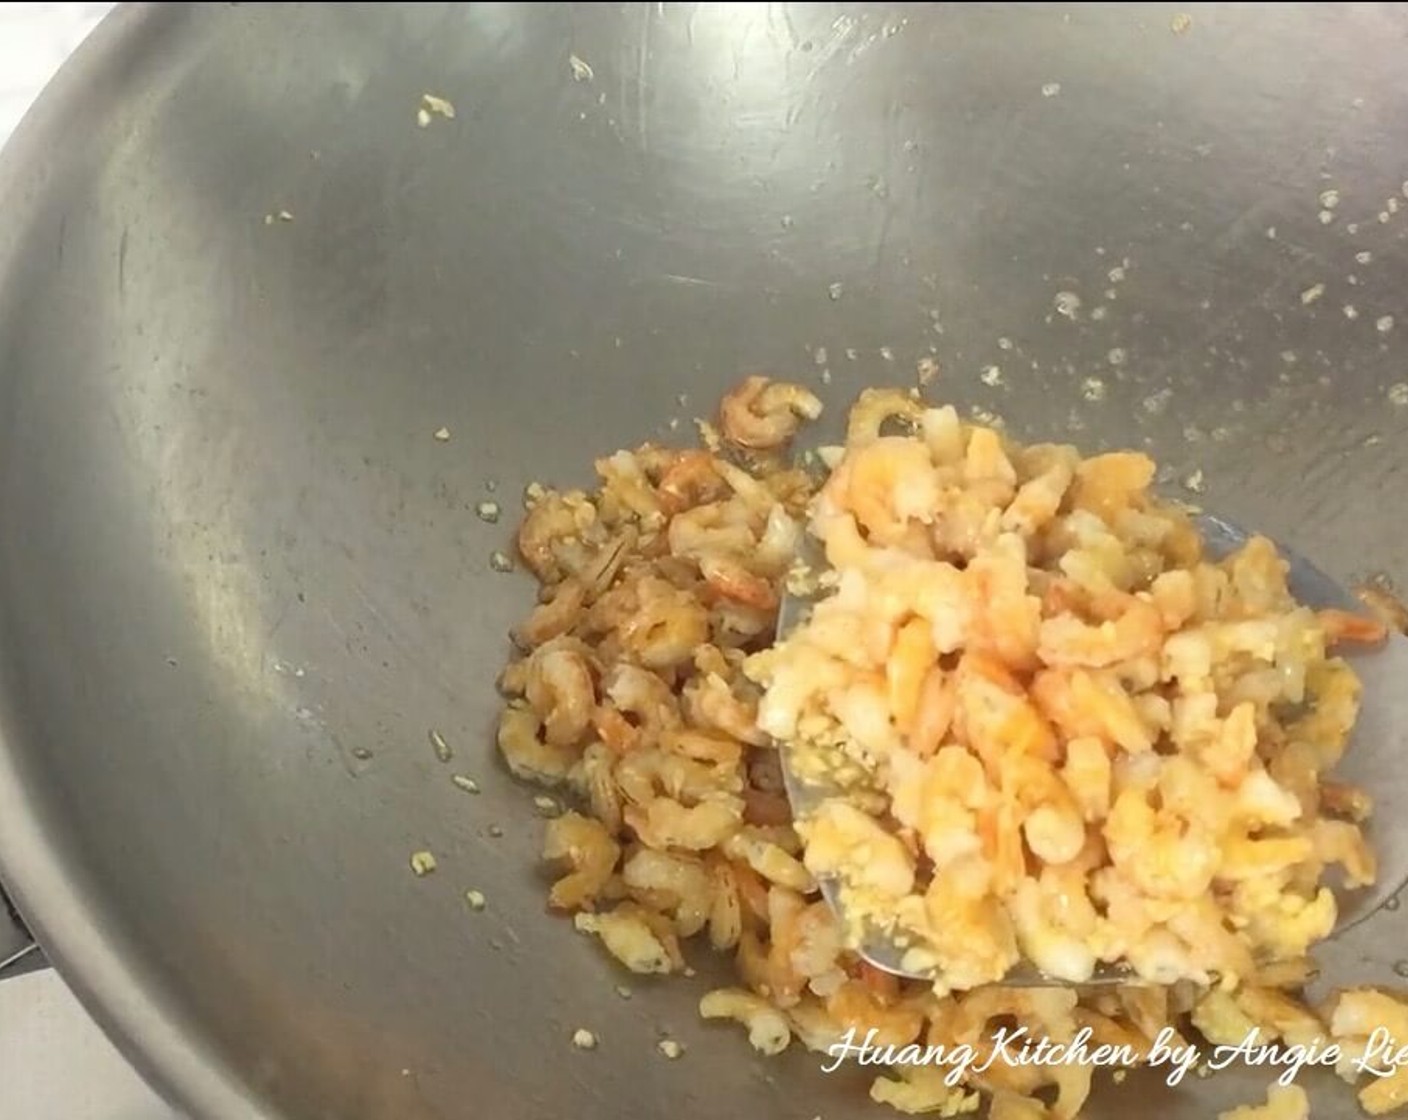 step 8 Drain well and fry in Oil (as needed) until golden brown. Place in a bowl and set aside.